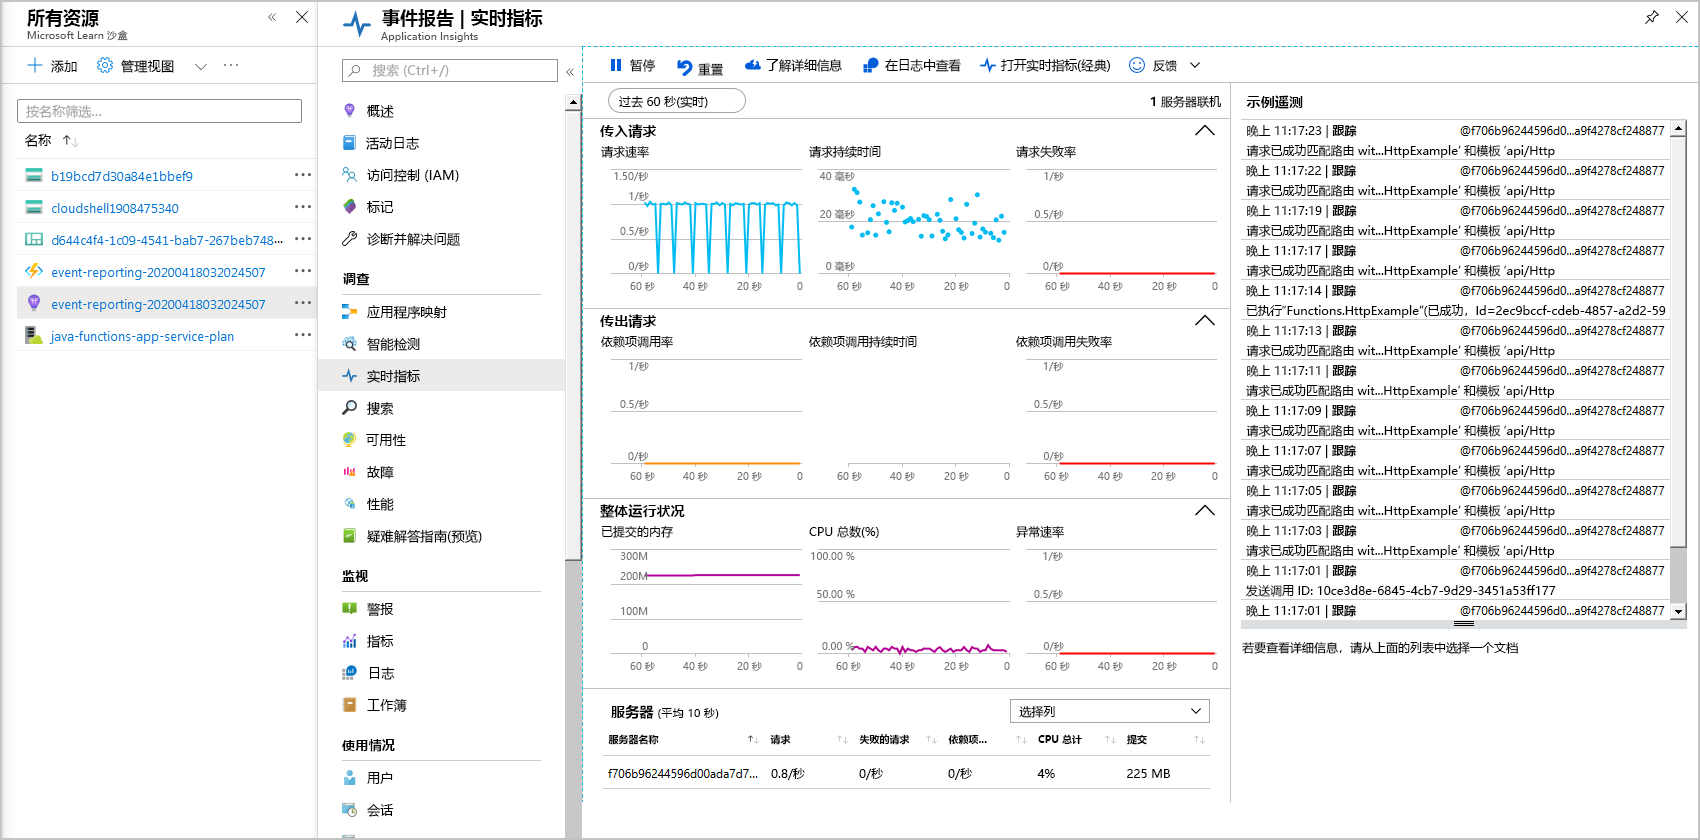 Image showing Application Insights and Live Metrics highlights.